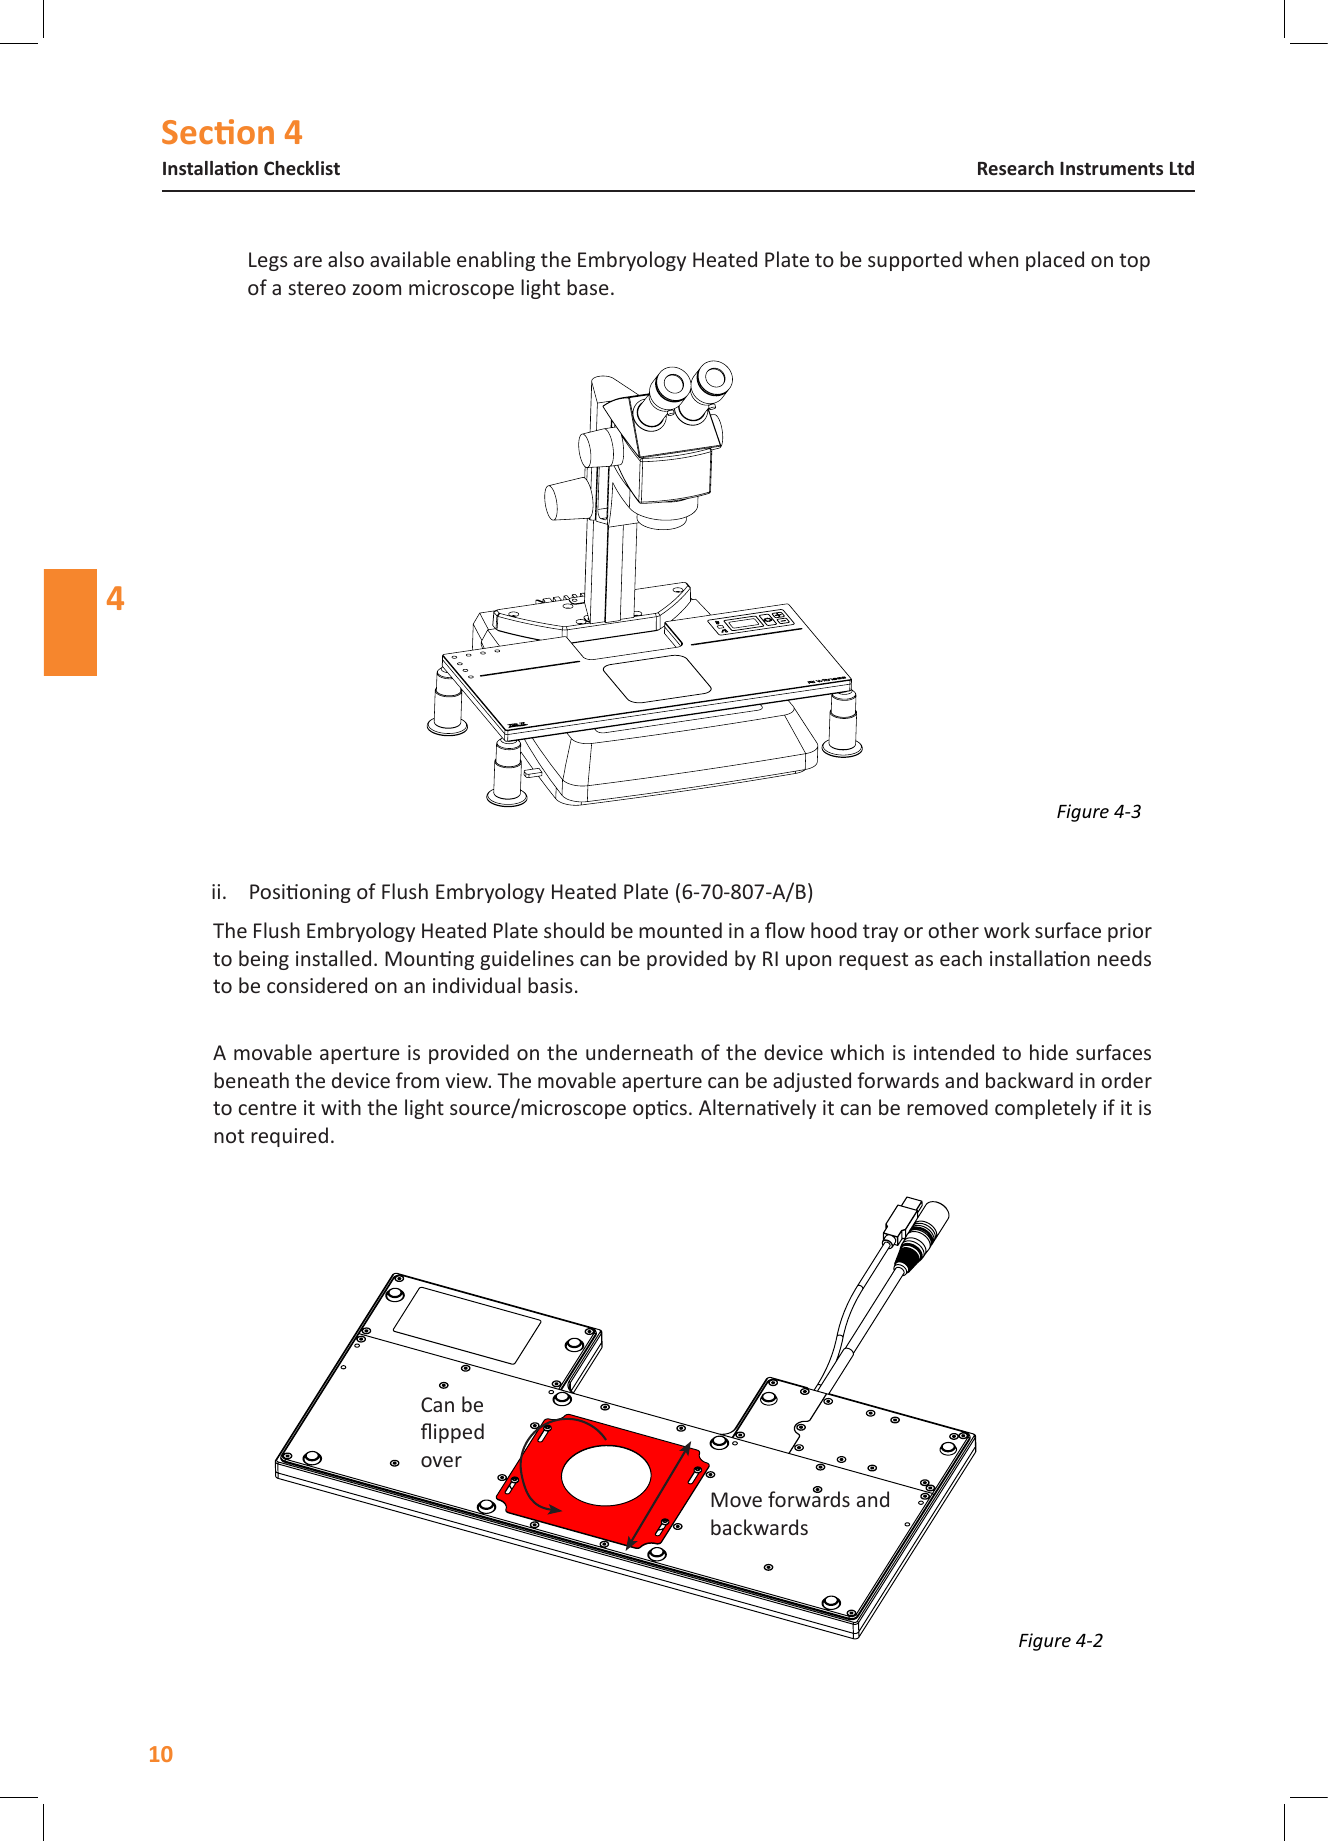 Secon 4Installaon ChecklistResearch Instruments Ltd4Legs are also available enabling the Embryology Heated Plate to be supported when placed on top of a stereo zoom microscope light base.Figure 4-2 Move forwards and backwardsCan be ipped overFigure 4-3 ii.  Posioning of Flush Embryology Heated Plate (6-70-807-A/B)The Flush Embryology Heated Plate should be mounted in a ow hood tray or other work surface prior to being installed. Mounng guidelines can be provided by RI upon request as each installaon needs to be considered on an individual basis.  A movable aperture is provided on the underneath of the device which is intended to hide surfaces beneath the device from view. The movable aperture can be adjusted forwards and backward in order to centre it with the light source/microscope opcs. Alternavely it can be removed completely if it is not required.